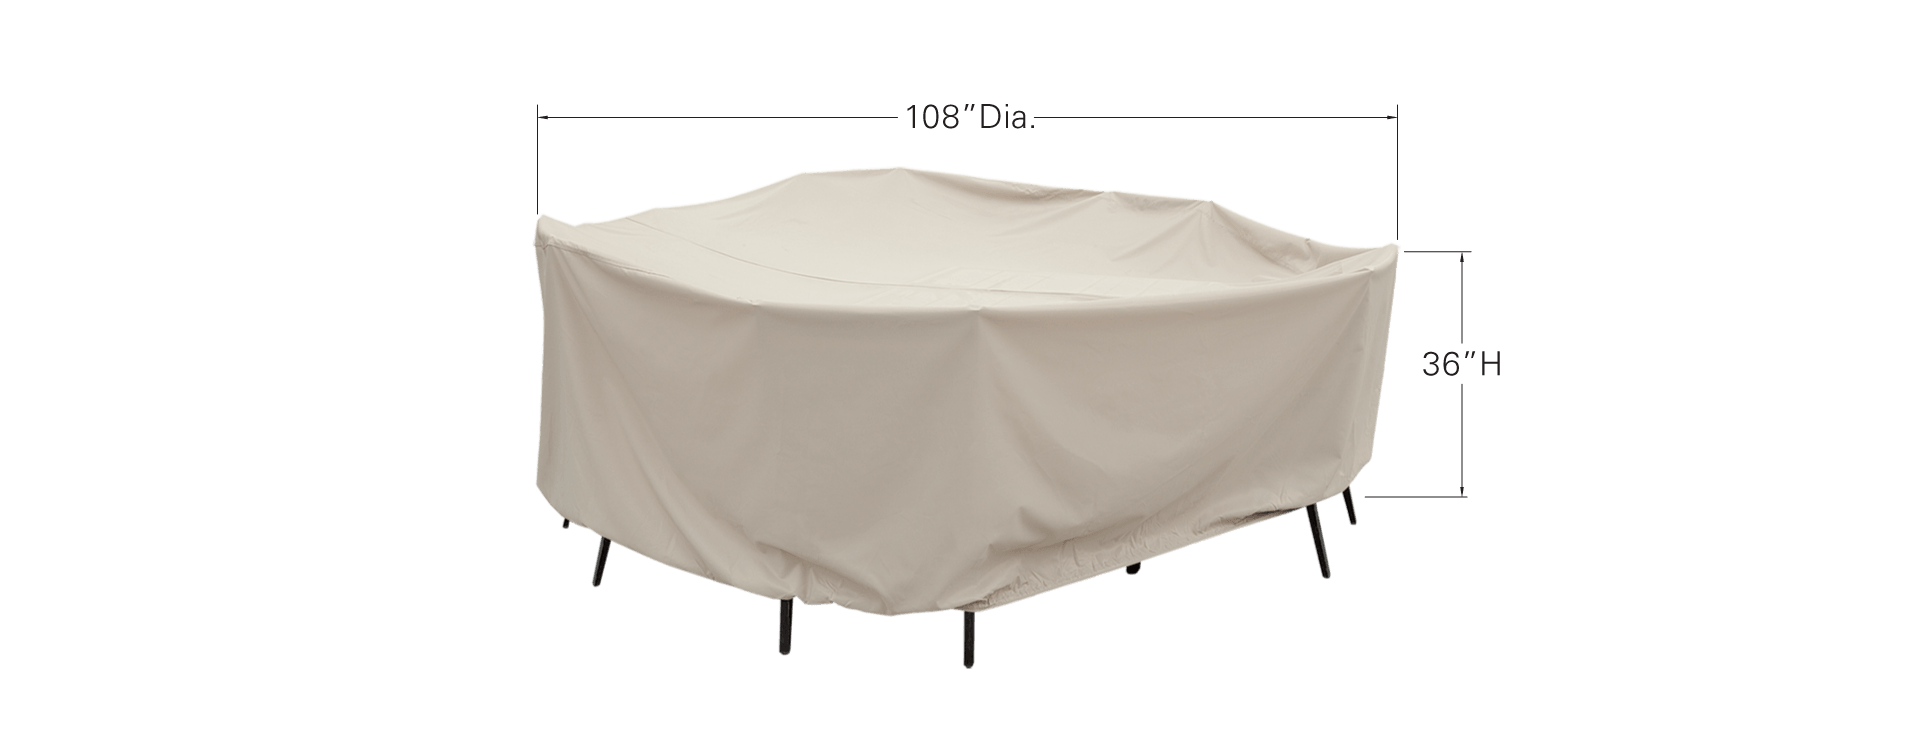 60" Round/Square Table & Chairs Protective Cover